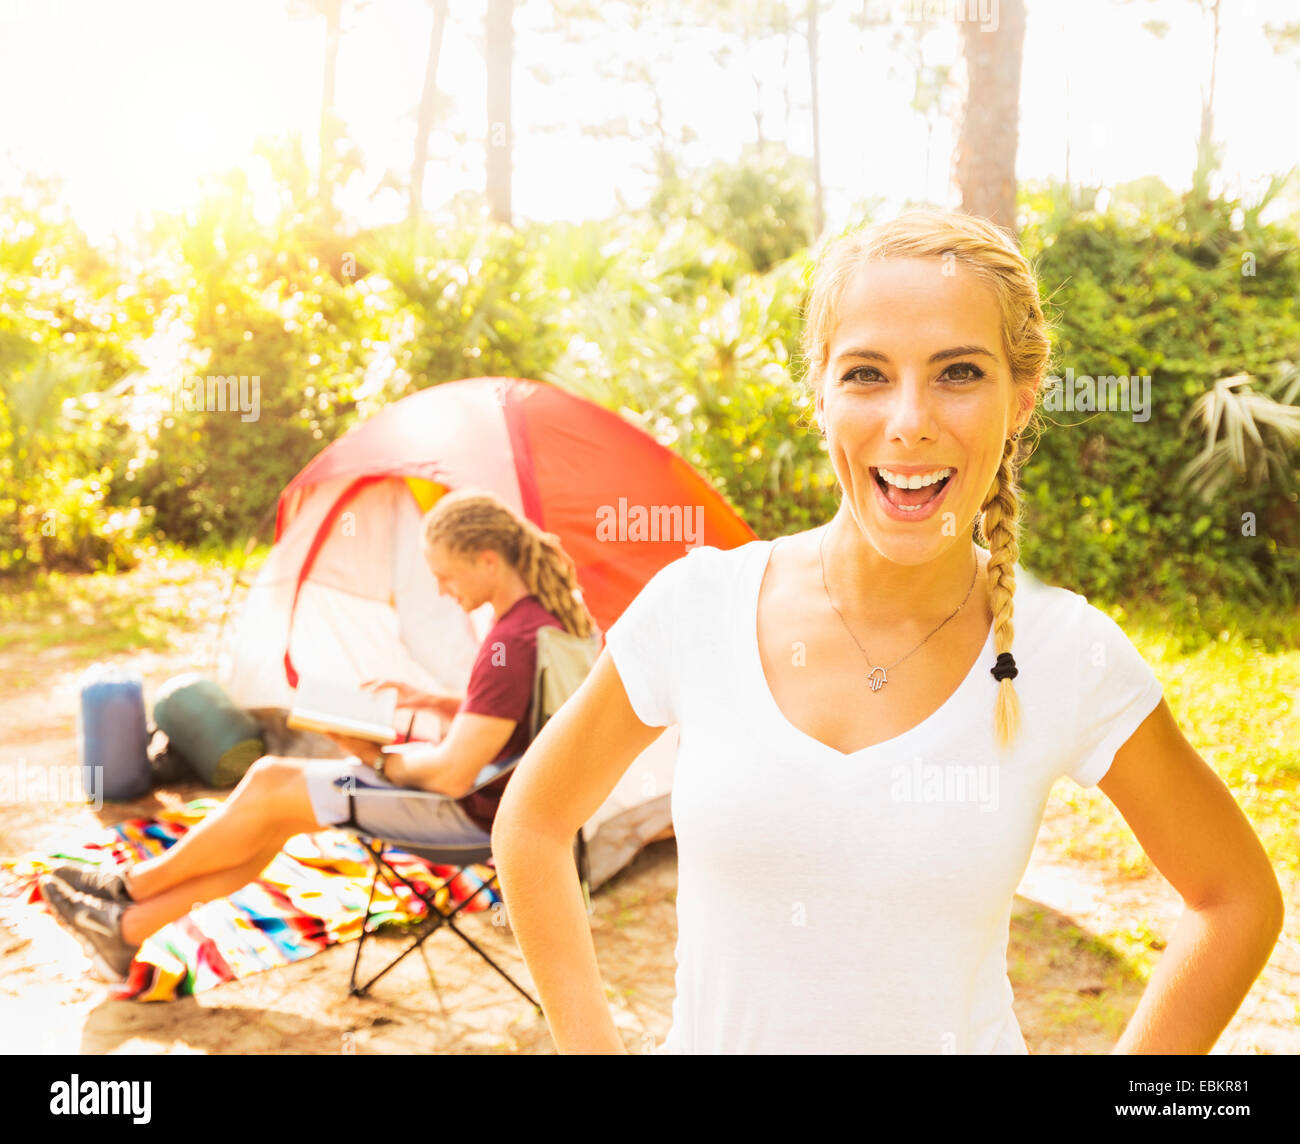 USA, Florida, Tequesta, Portrait of smiling woman and man reading book Stock Photo